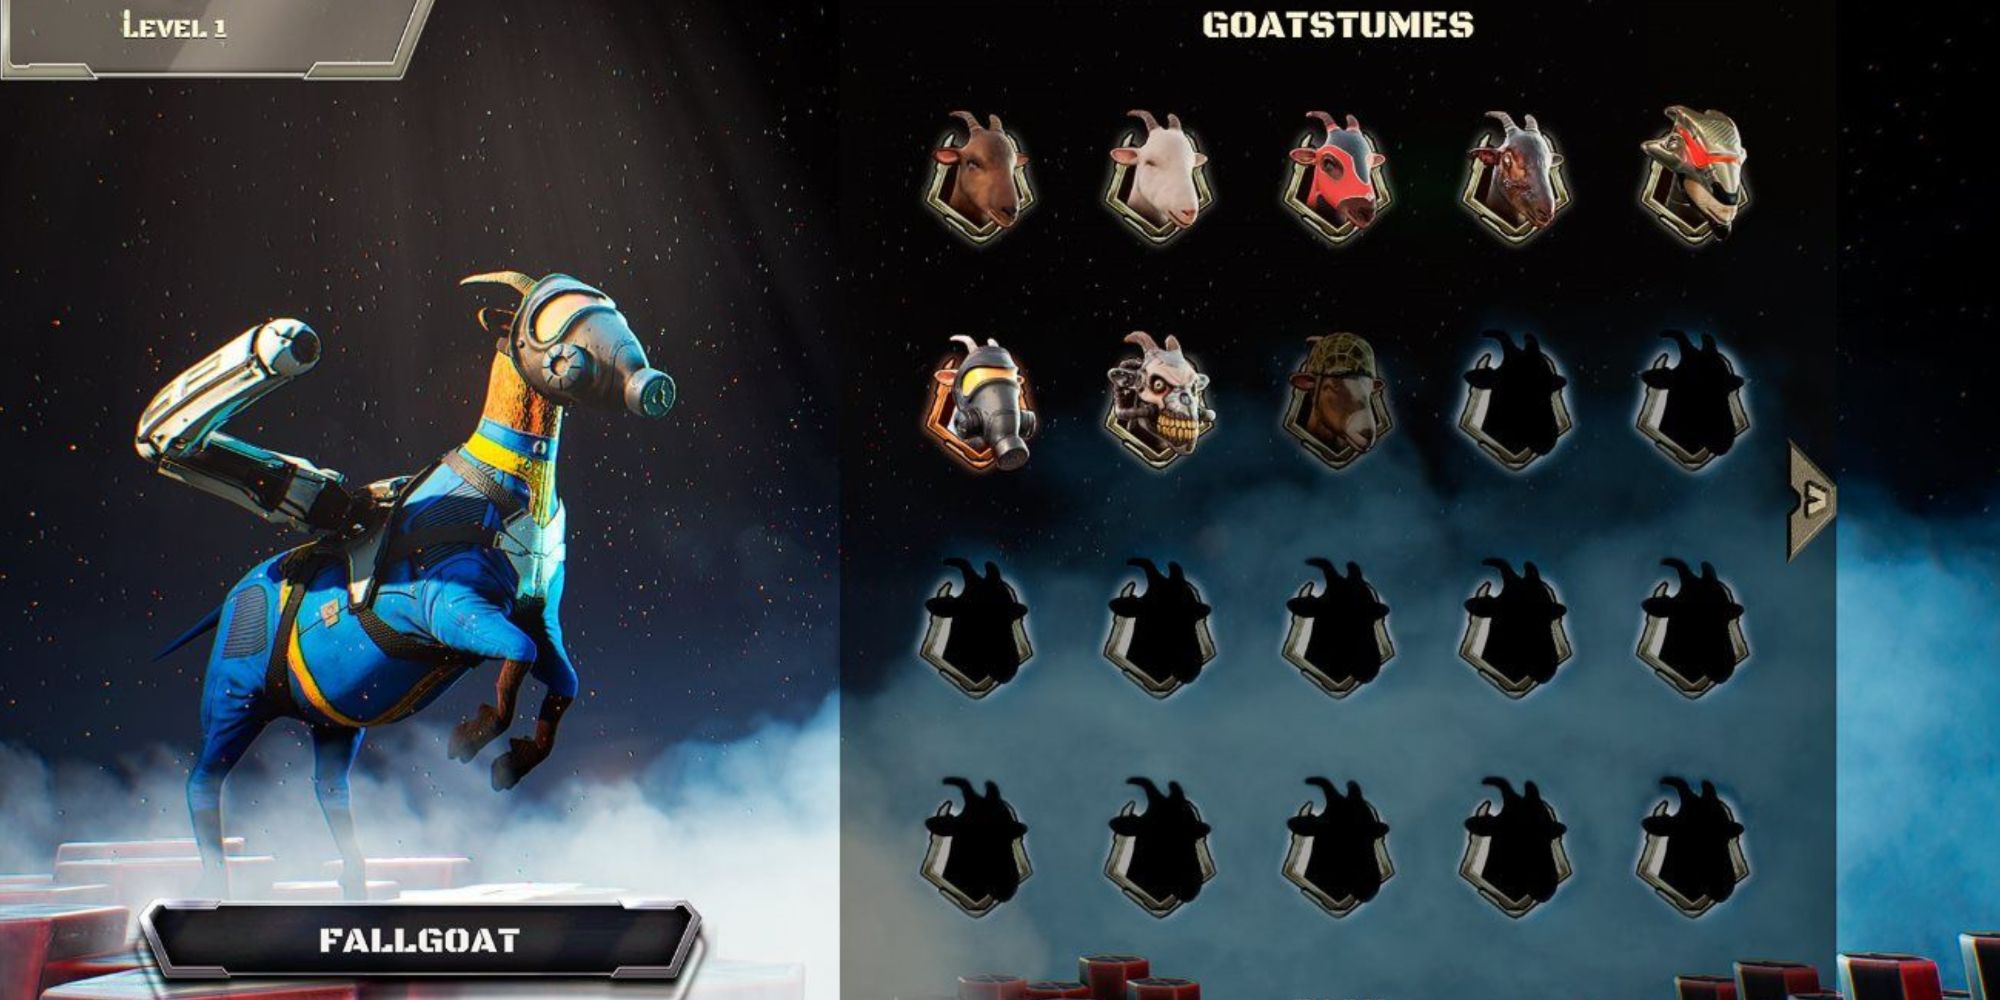 A level 1 goat appearing in the outfit selection menu in Goat of Duty, with the Fallgoat goatstume selected for the character.